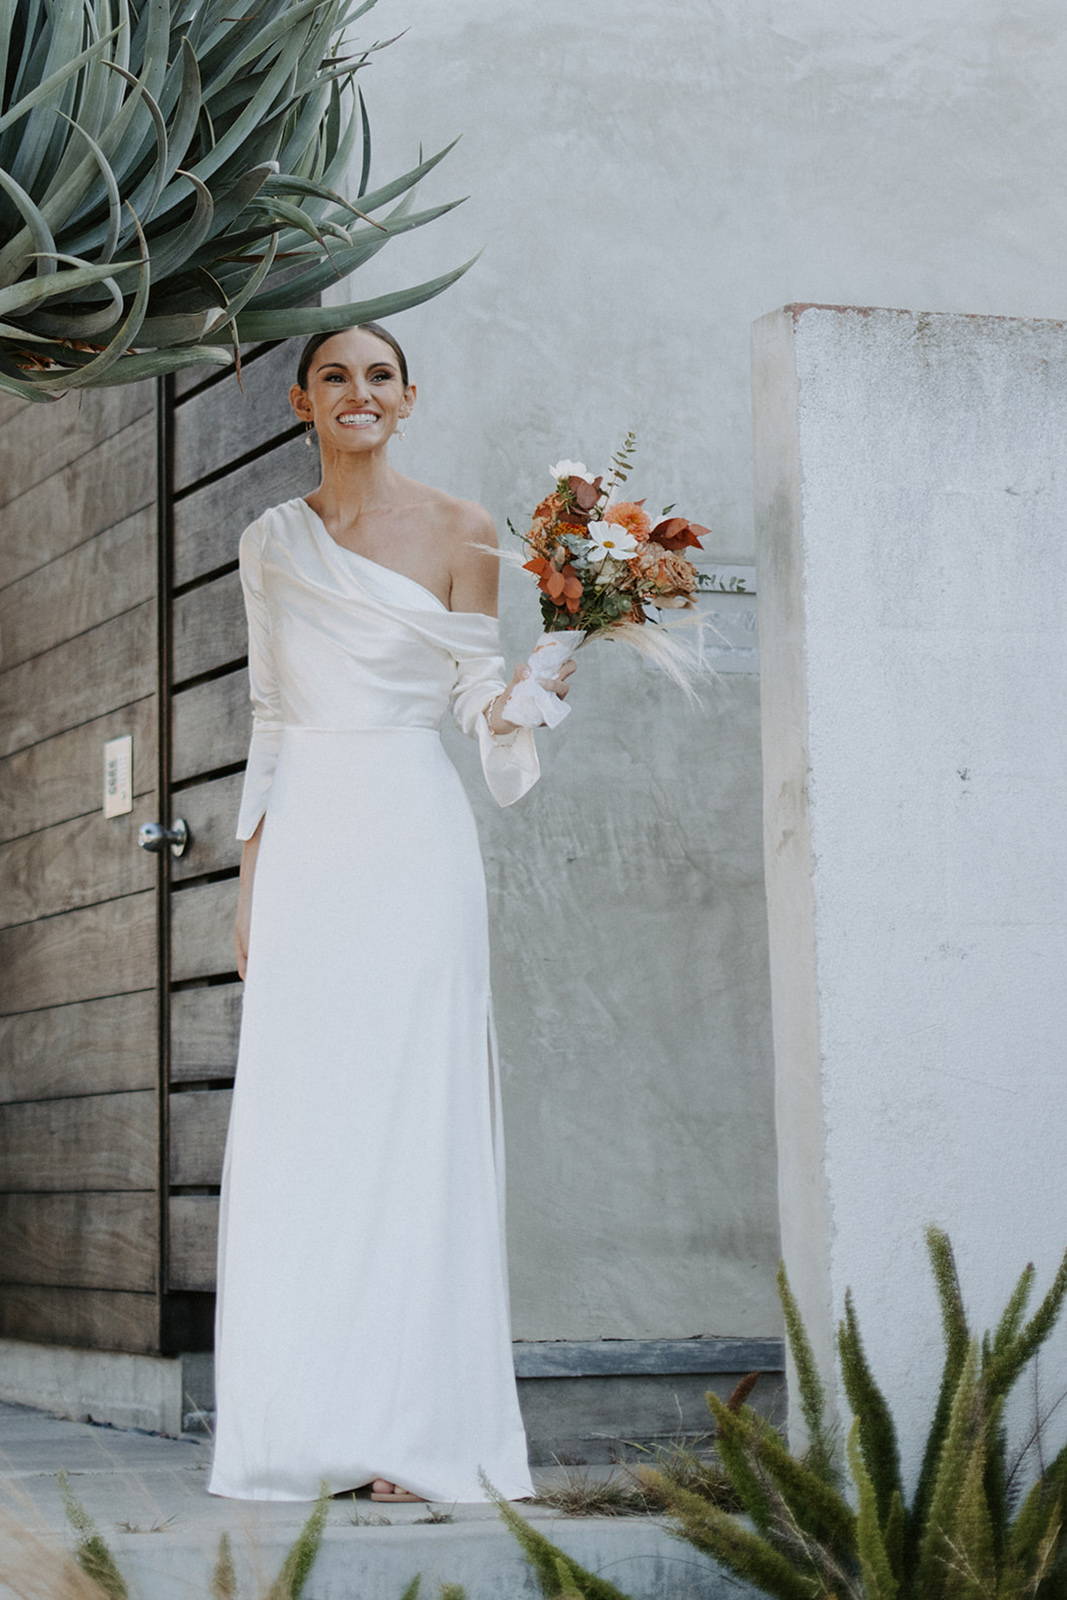 Bride smiling, holding her flowers